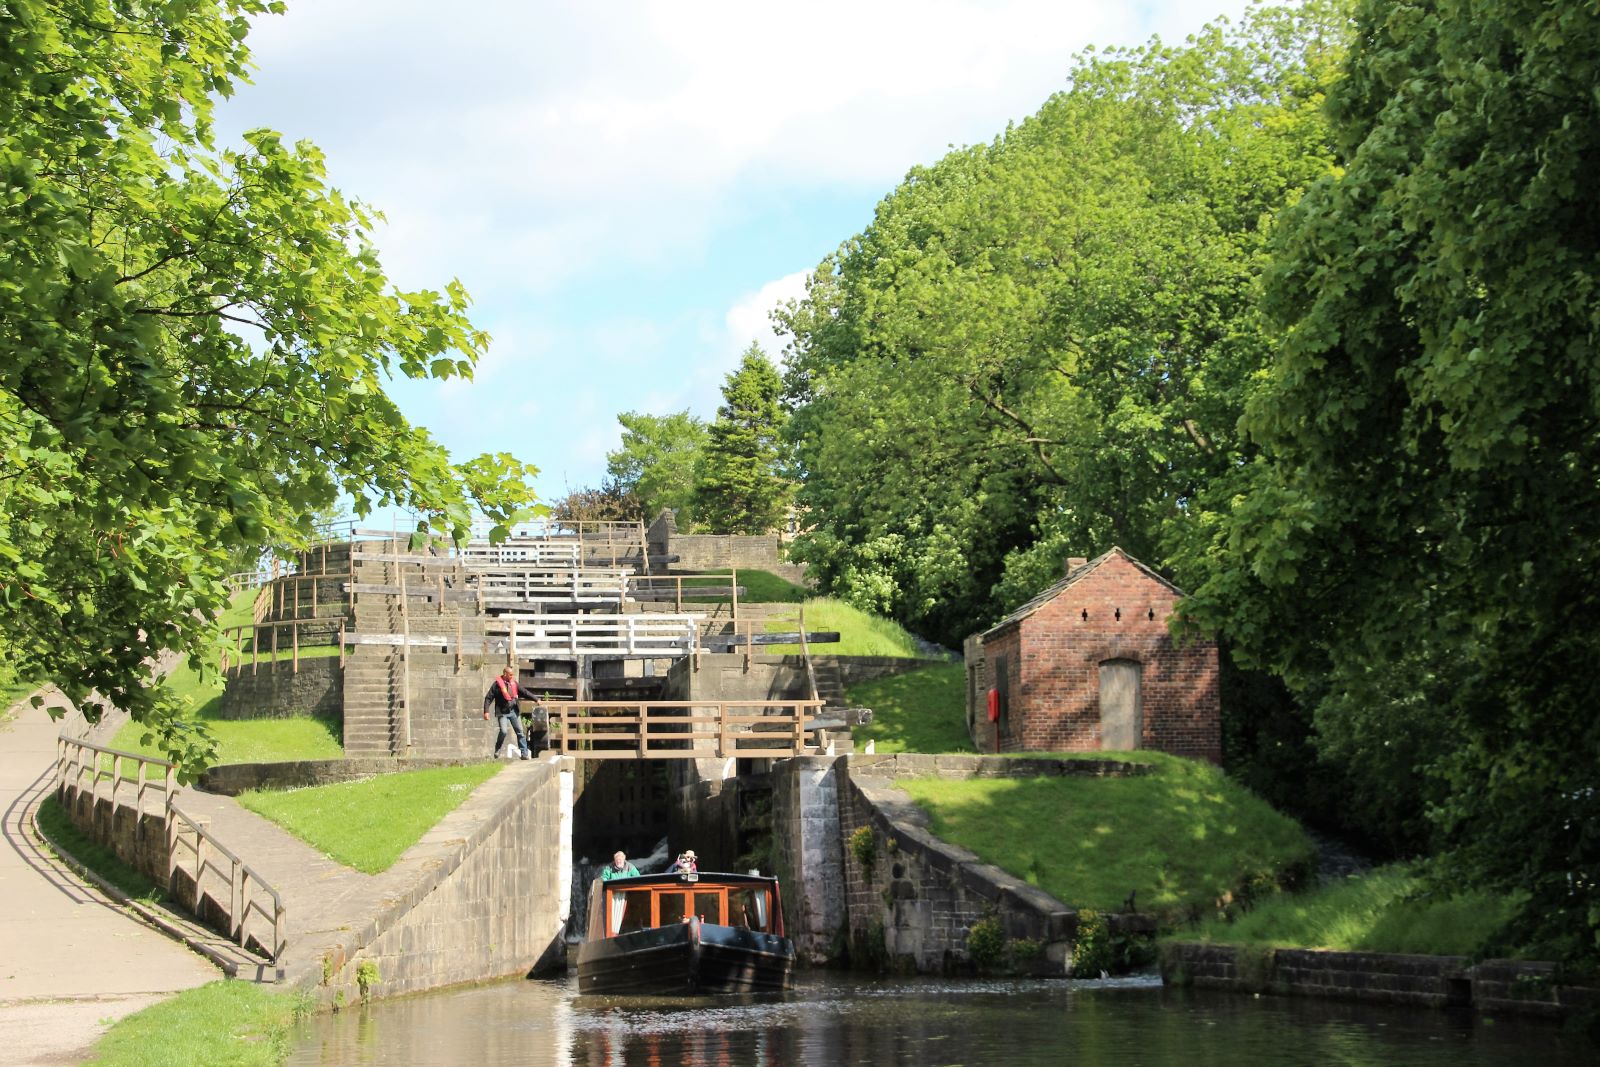 Travel through the Bingley Five Rise locks on a canal boat holiday